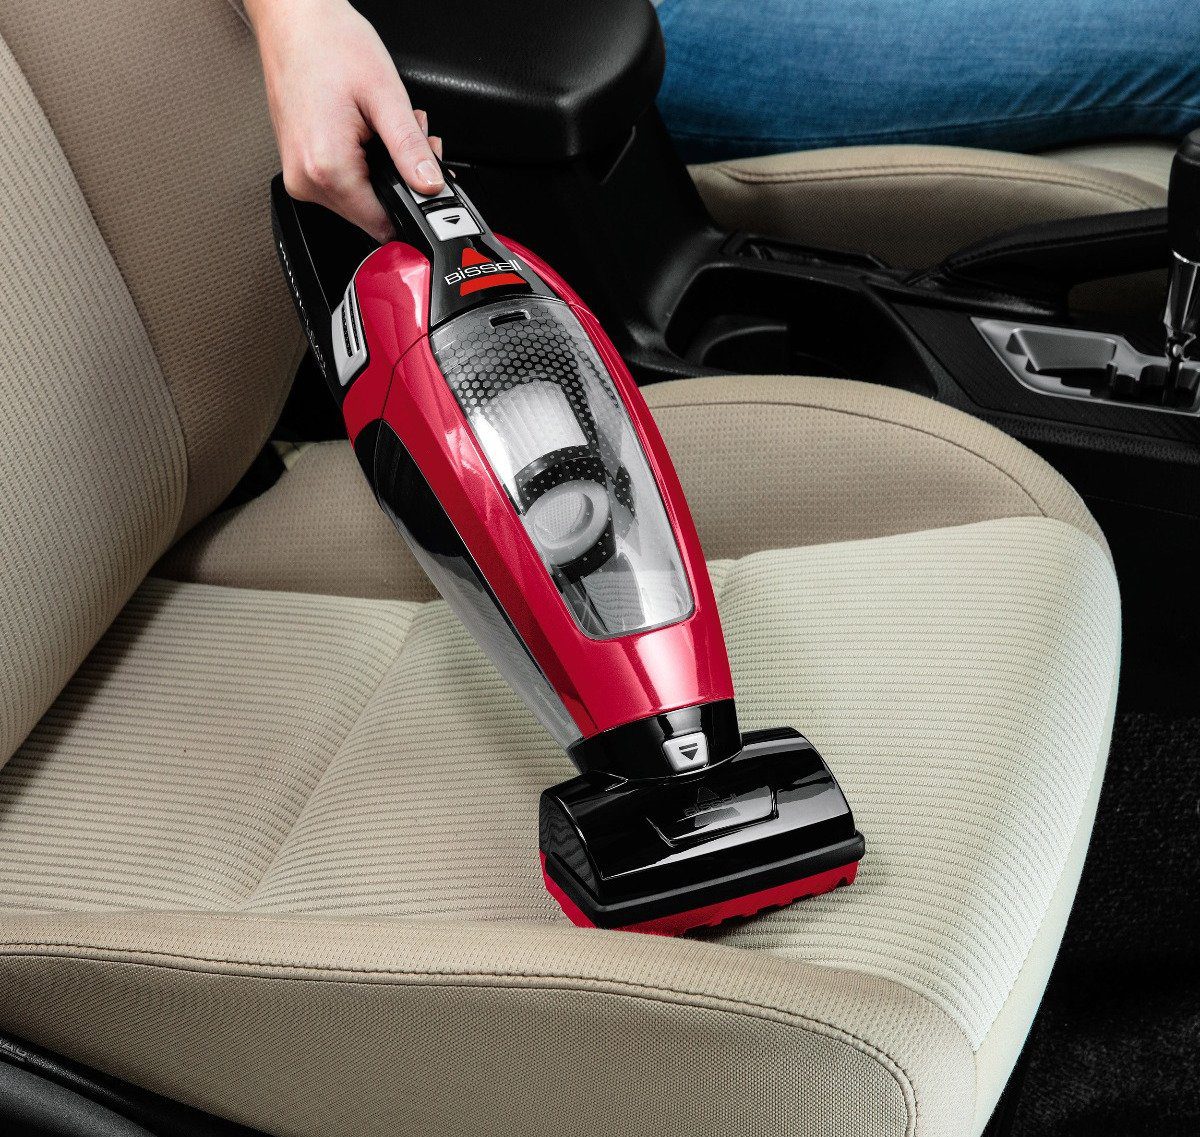 Cordless Vacuum Cleaner: 5 Types and Tips